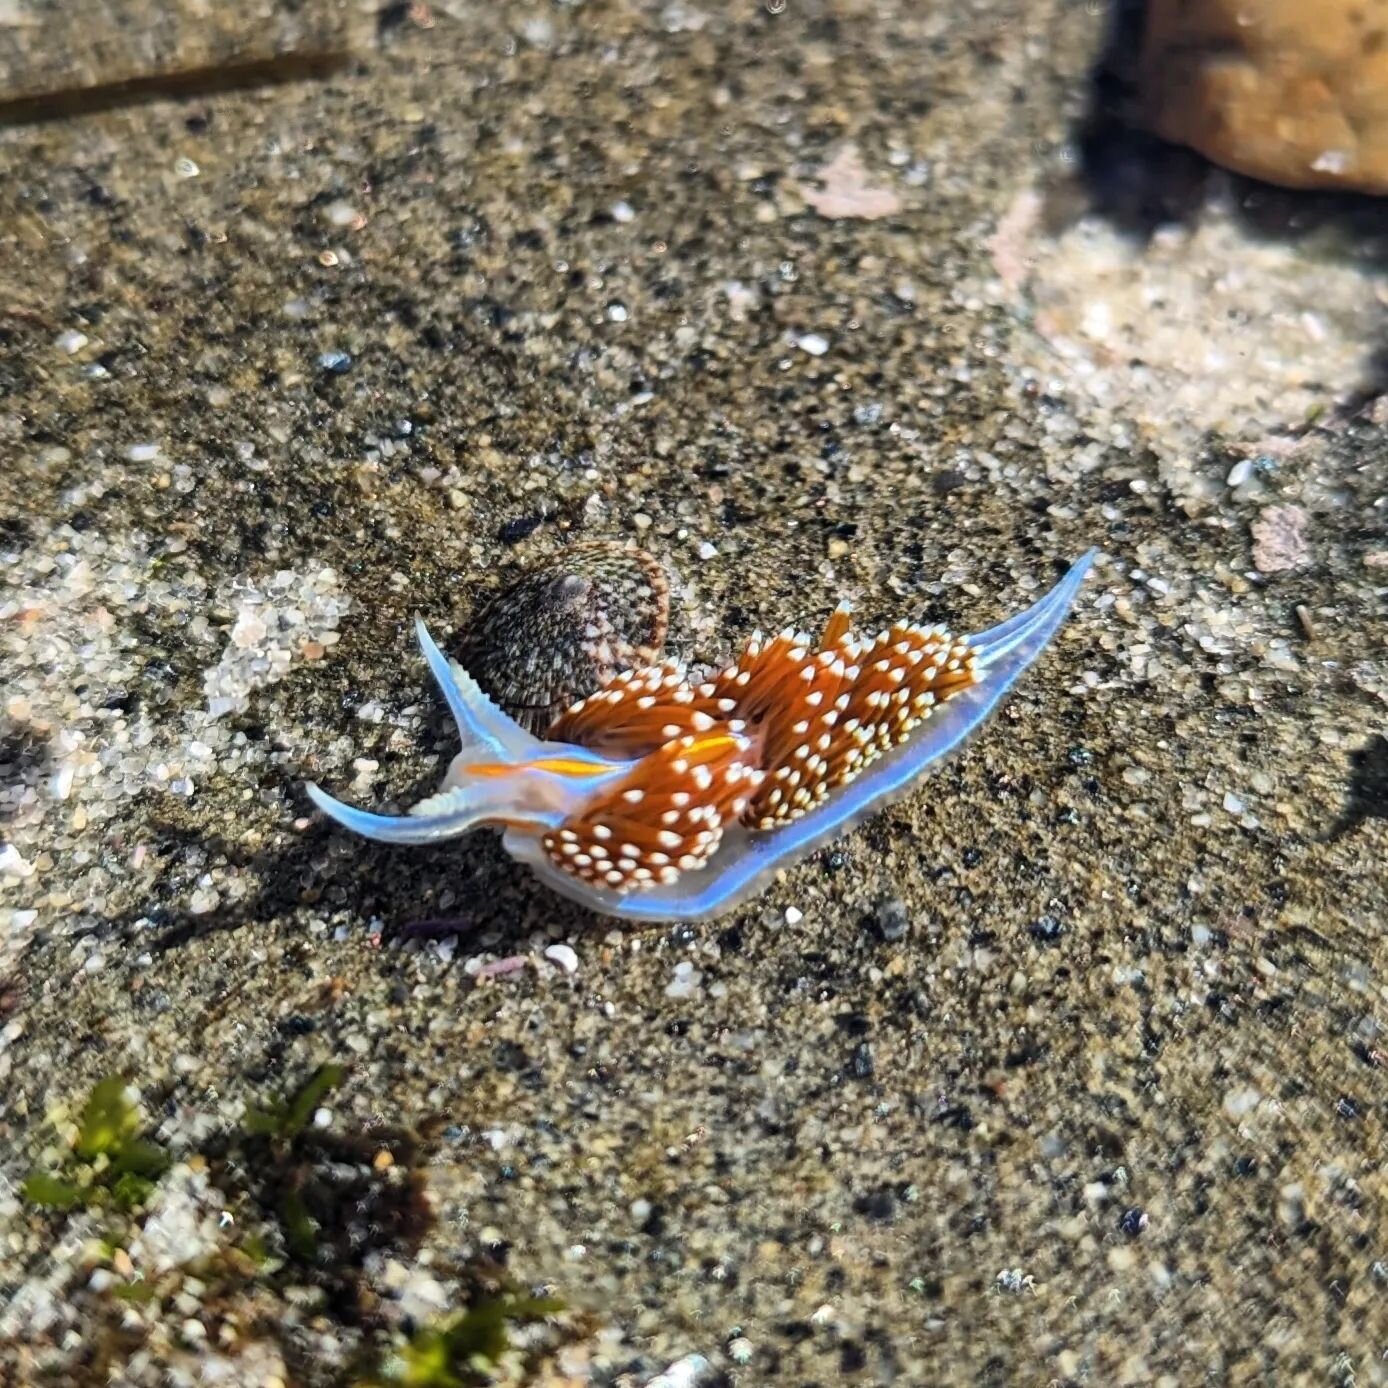 It's no joke, the tide pools have been amazing this year! Finding creatures like this opalescent nudibranch makes for a great spring break activity! 
.
.
.
#tide #pool #lowtide #nudibranch #seaslug #tidepools #sandiego #california #adventure #familyf